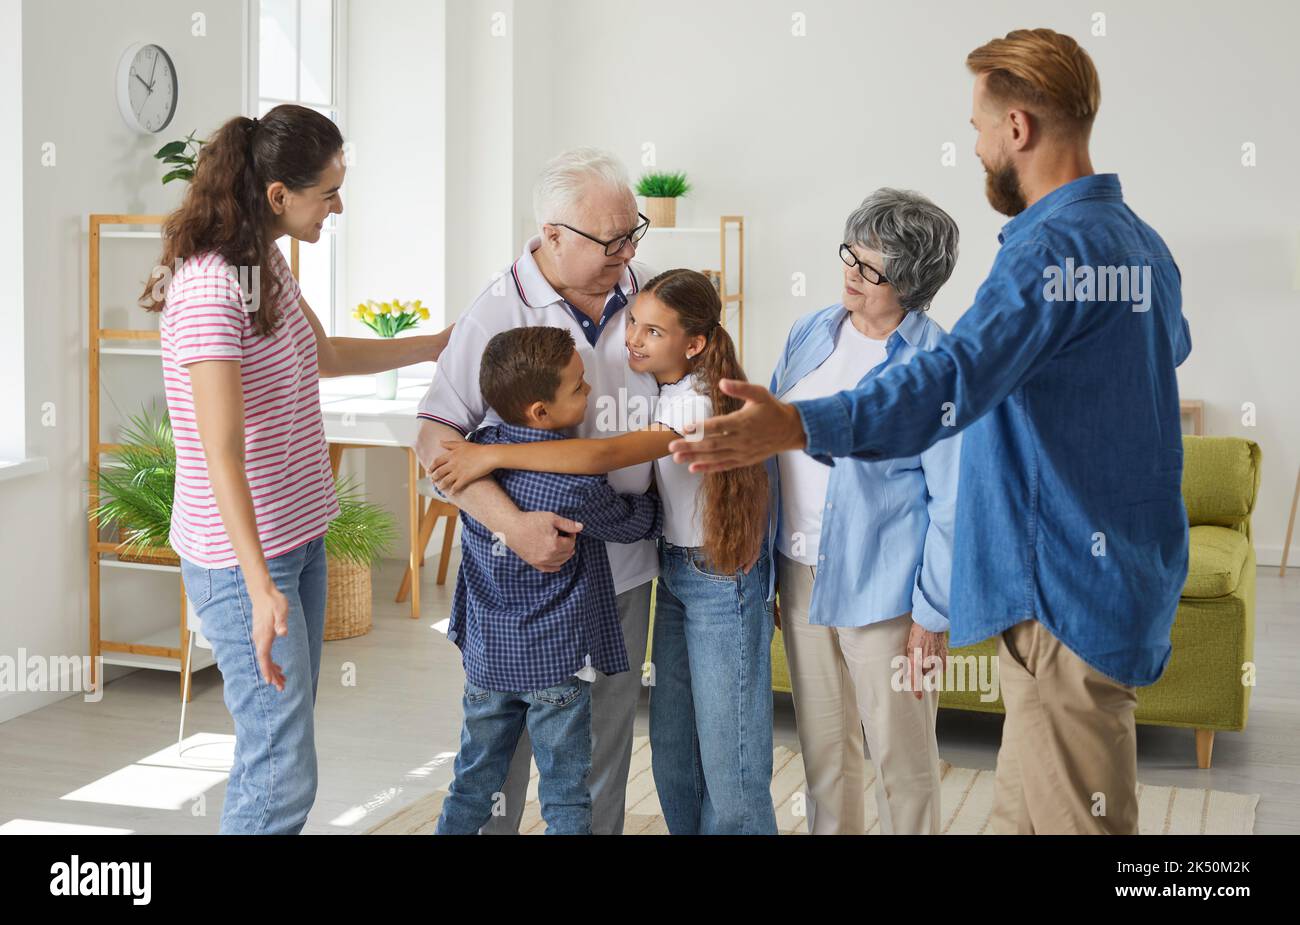 Large friendly family meets together on weekends to spend bonding times at home. Stock Photo